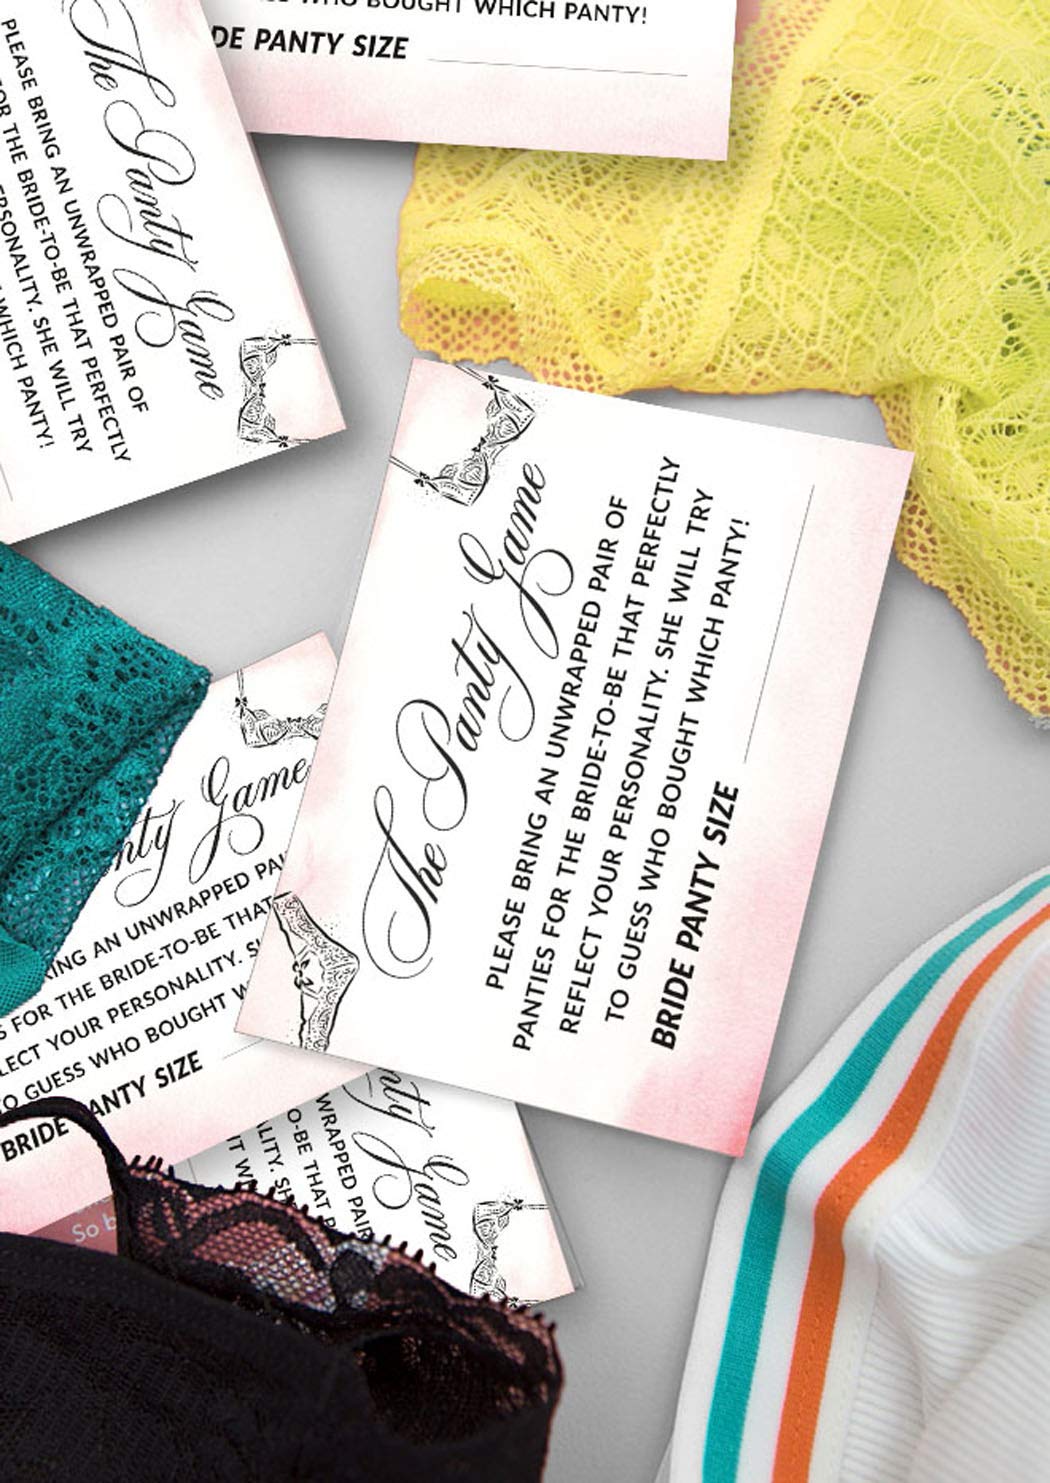 Inkdotpot Girls Night Out Bachelorette Party Panty Game Lingerie Shower Bridal Shower Game 1 Sign + 30 Size Cards White